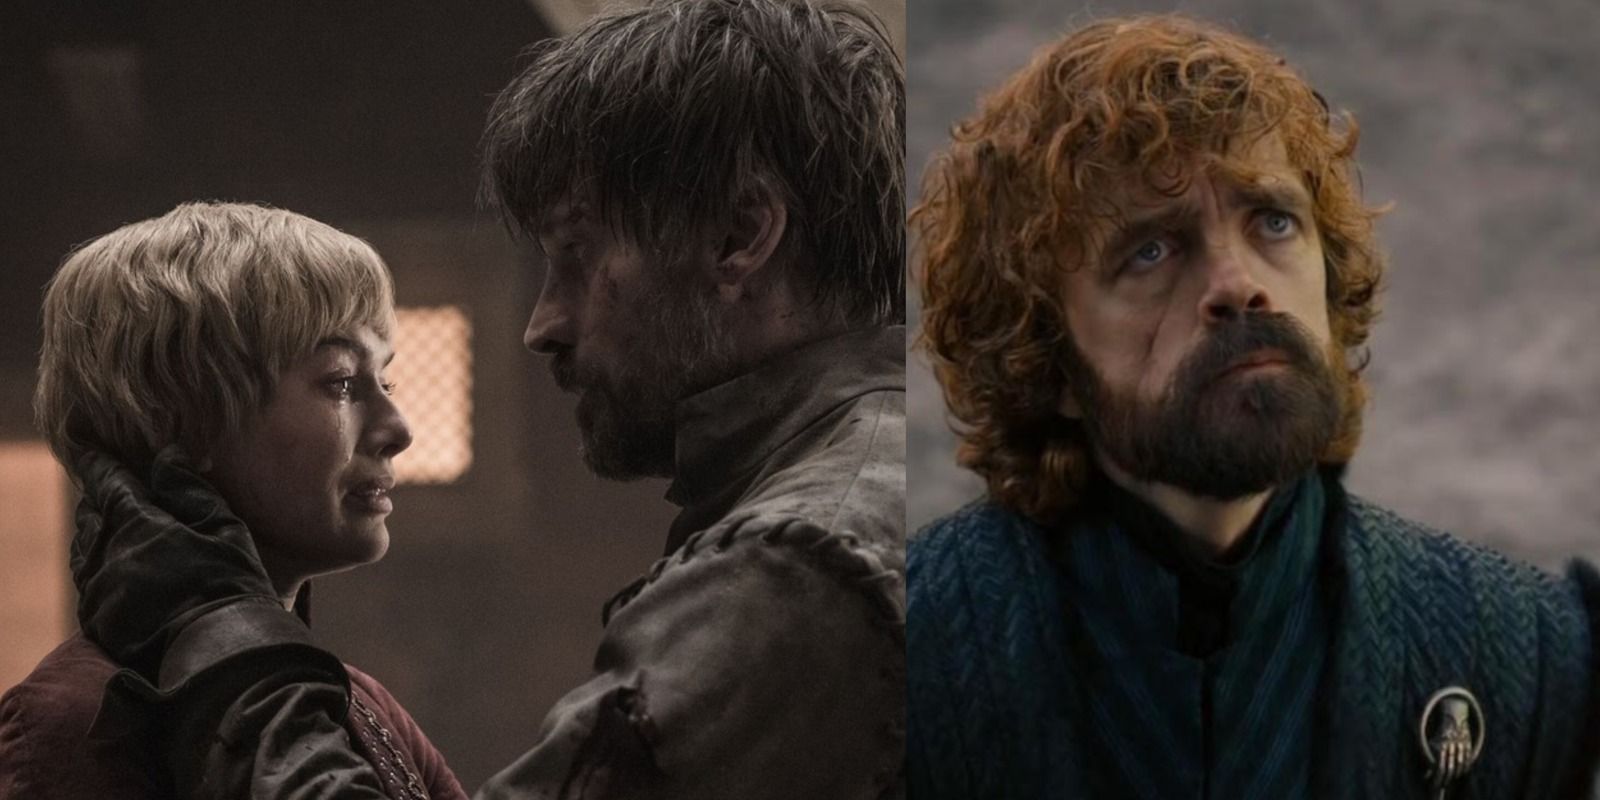 Split image of Game of Thrones scenes - Jaime and Cersei about to die and Tyrion looking up